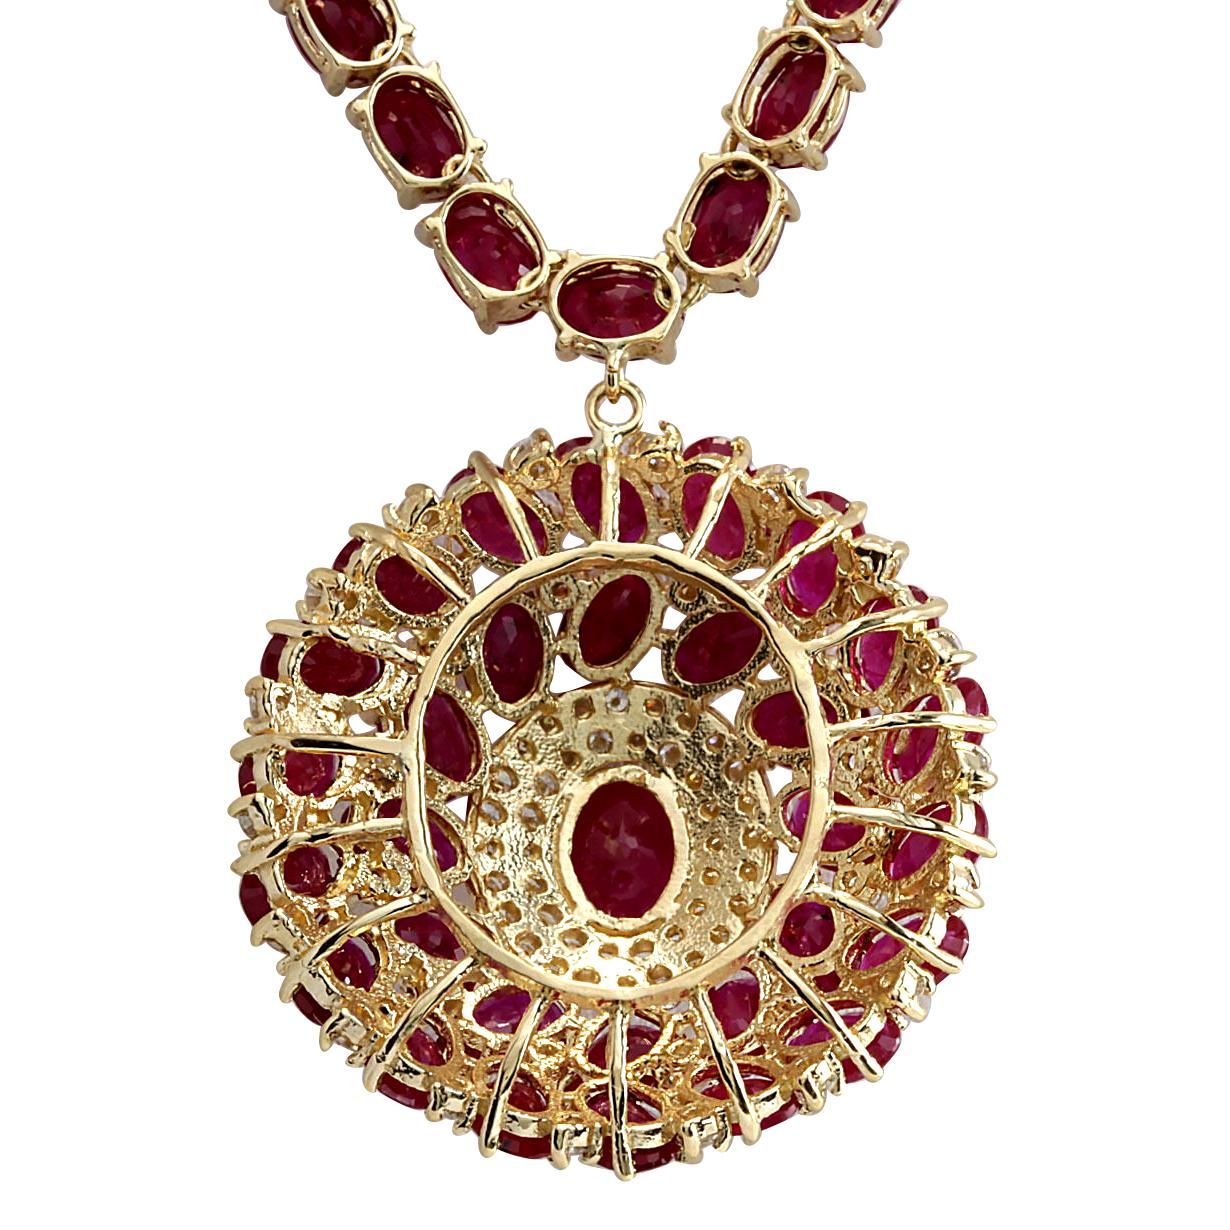 Stamped: 14K Yellow Gold
Total Necklace Weight: 29.0 Grams
Necklace Length: 17 Inches
Total Natural Center Ruby Weight is 1.76 Carat (Measures: 8.00x6.00 mm)
Color: Red
Total Natural Side Ruby Weight is 55.50 Carat
Color: Red
Total Natural Diamond